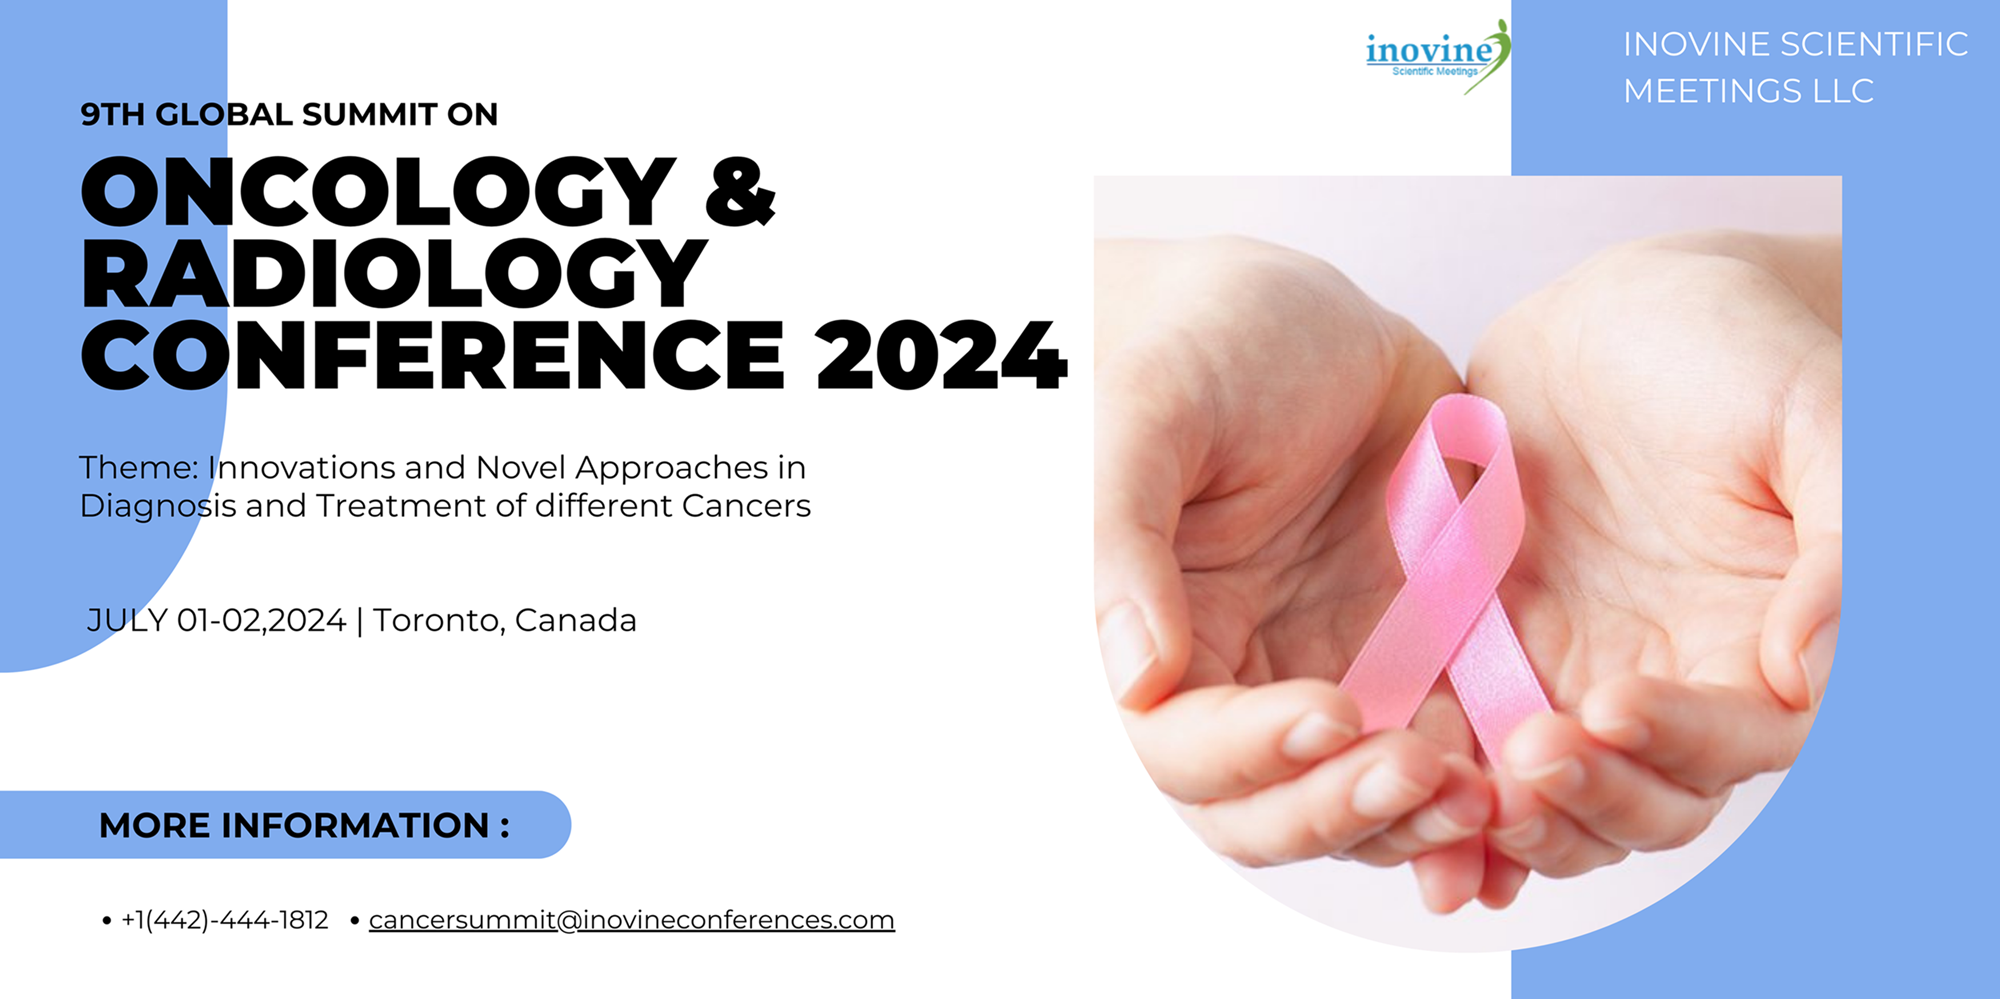 9th Global Summit on Oncology & Radiology, Toronto, Ontario, Canada